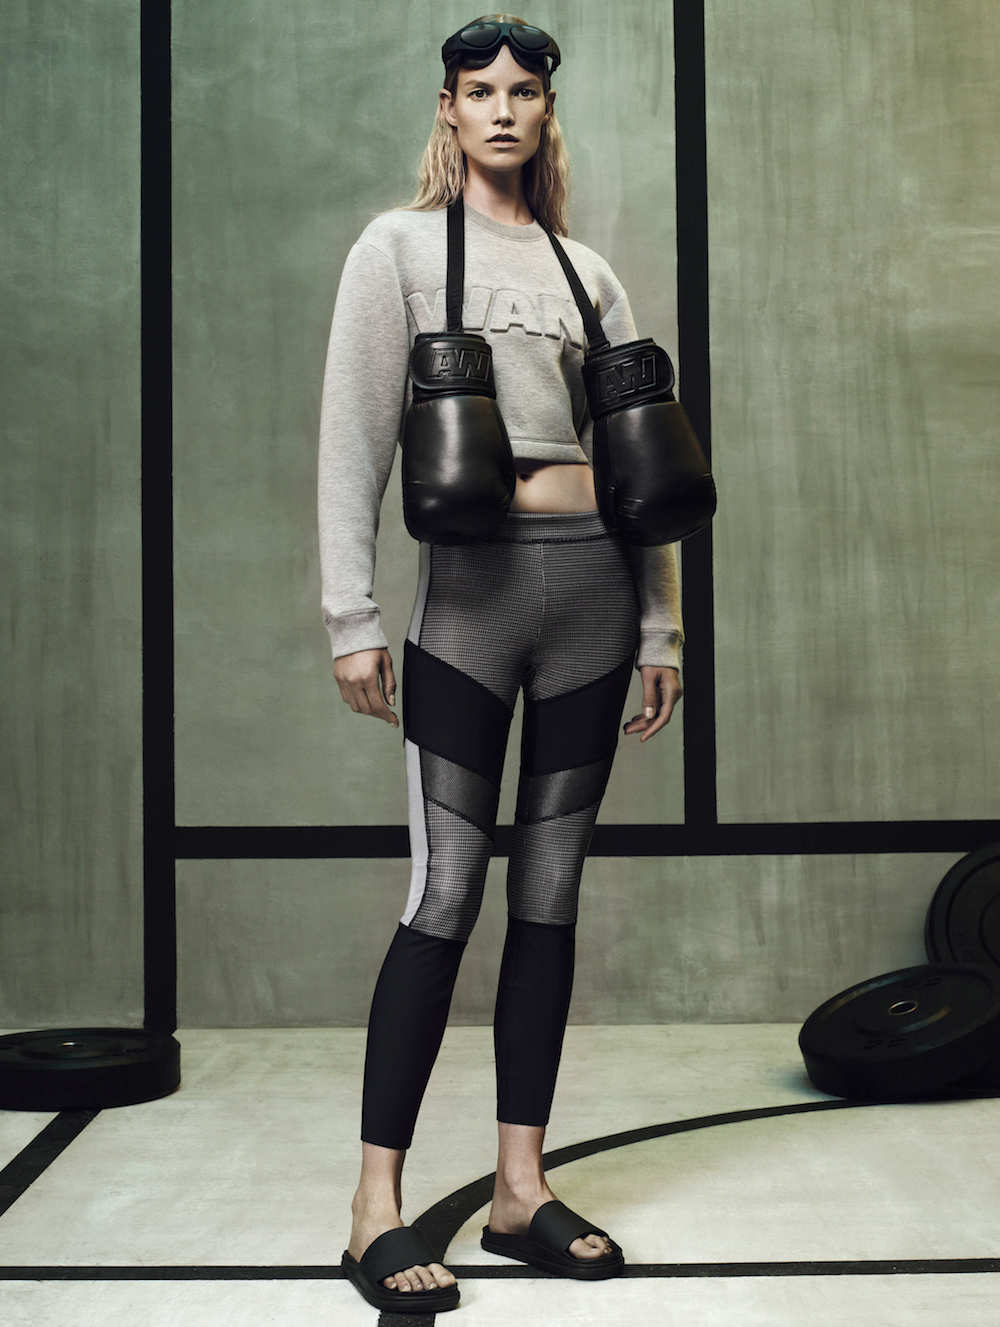 NEW Limited Edition Alexander Wang for H&M Yoga Sport Mat & Bag 